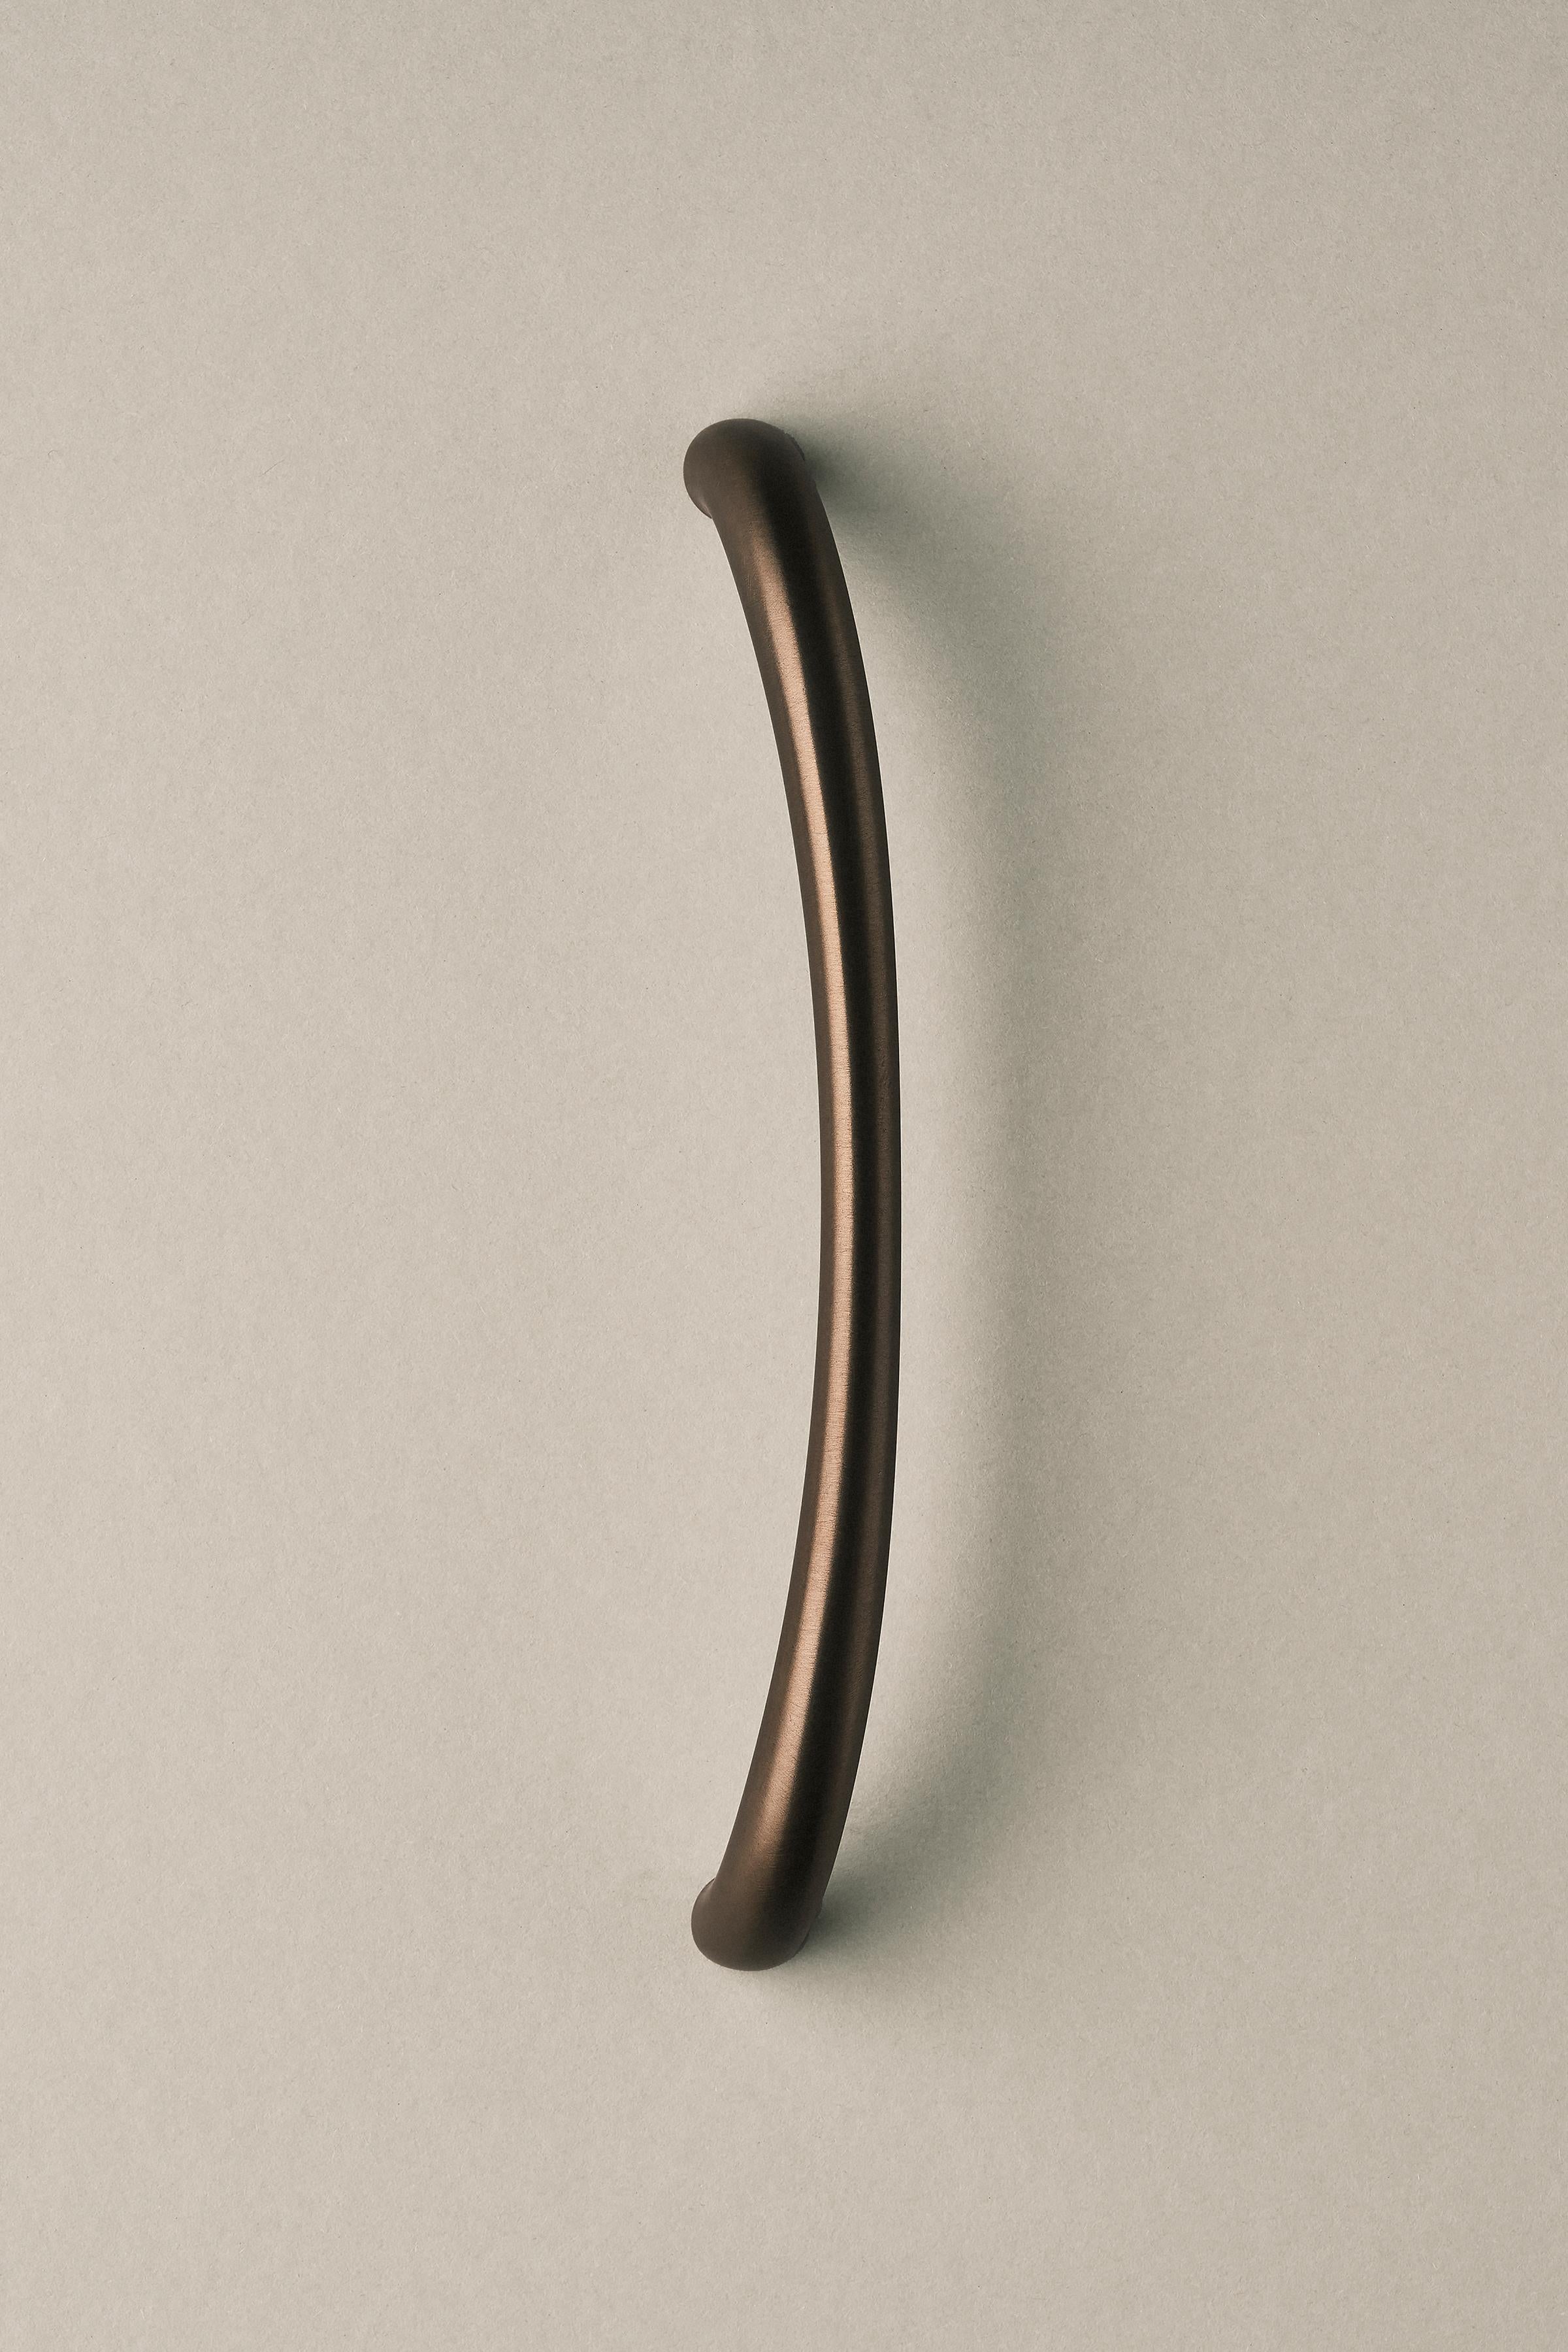 Contemporary Door Handle / Knob 'Suave' by Spaces Within, Amber Brass For Sale 4